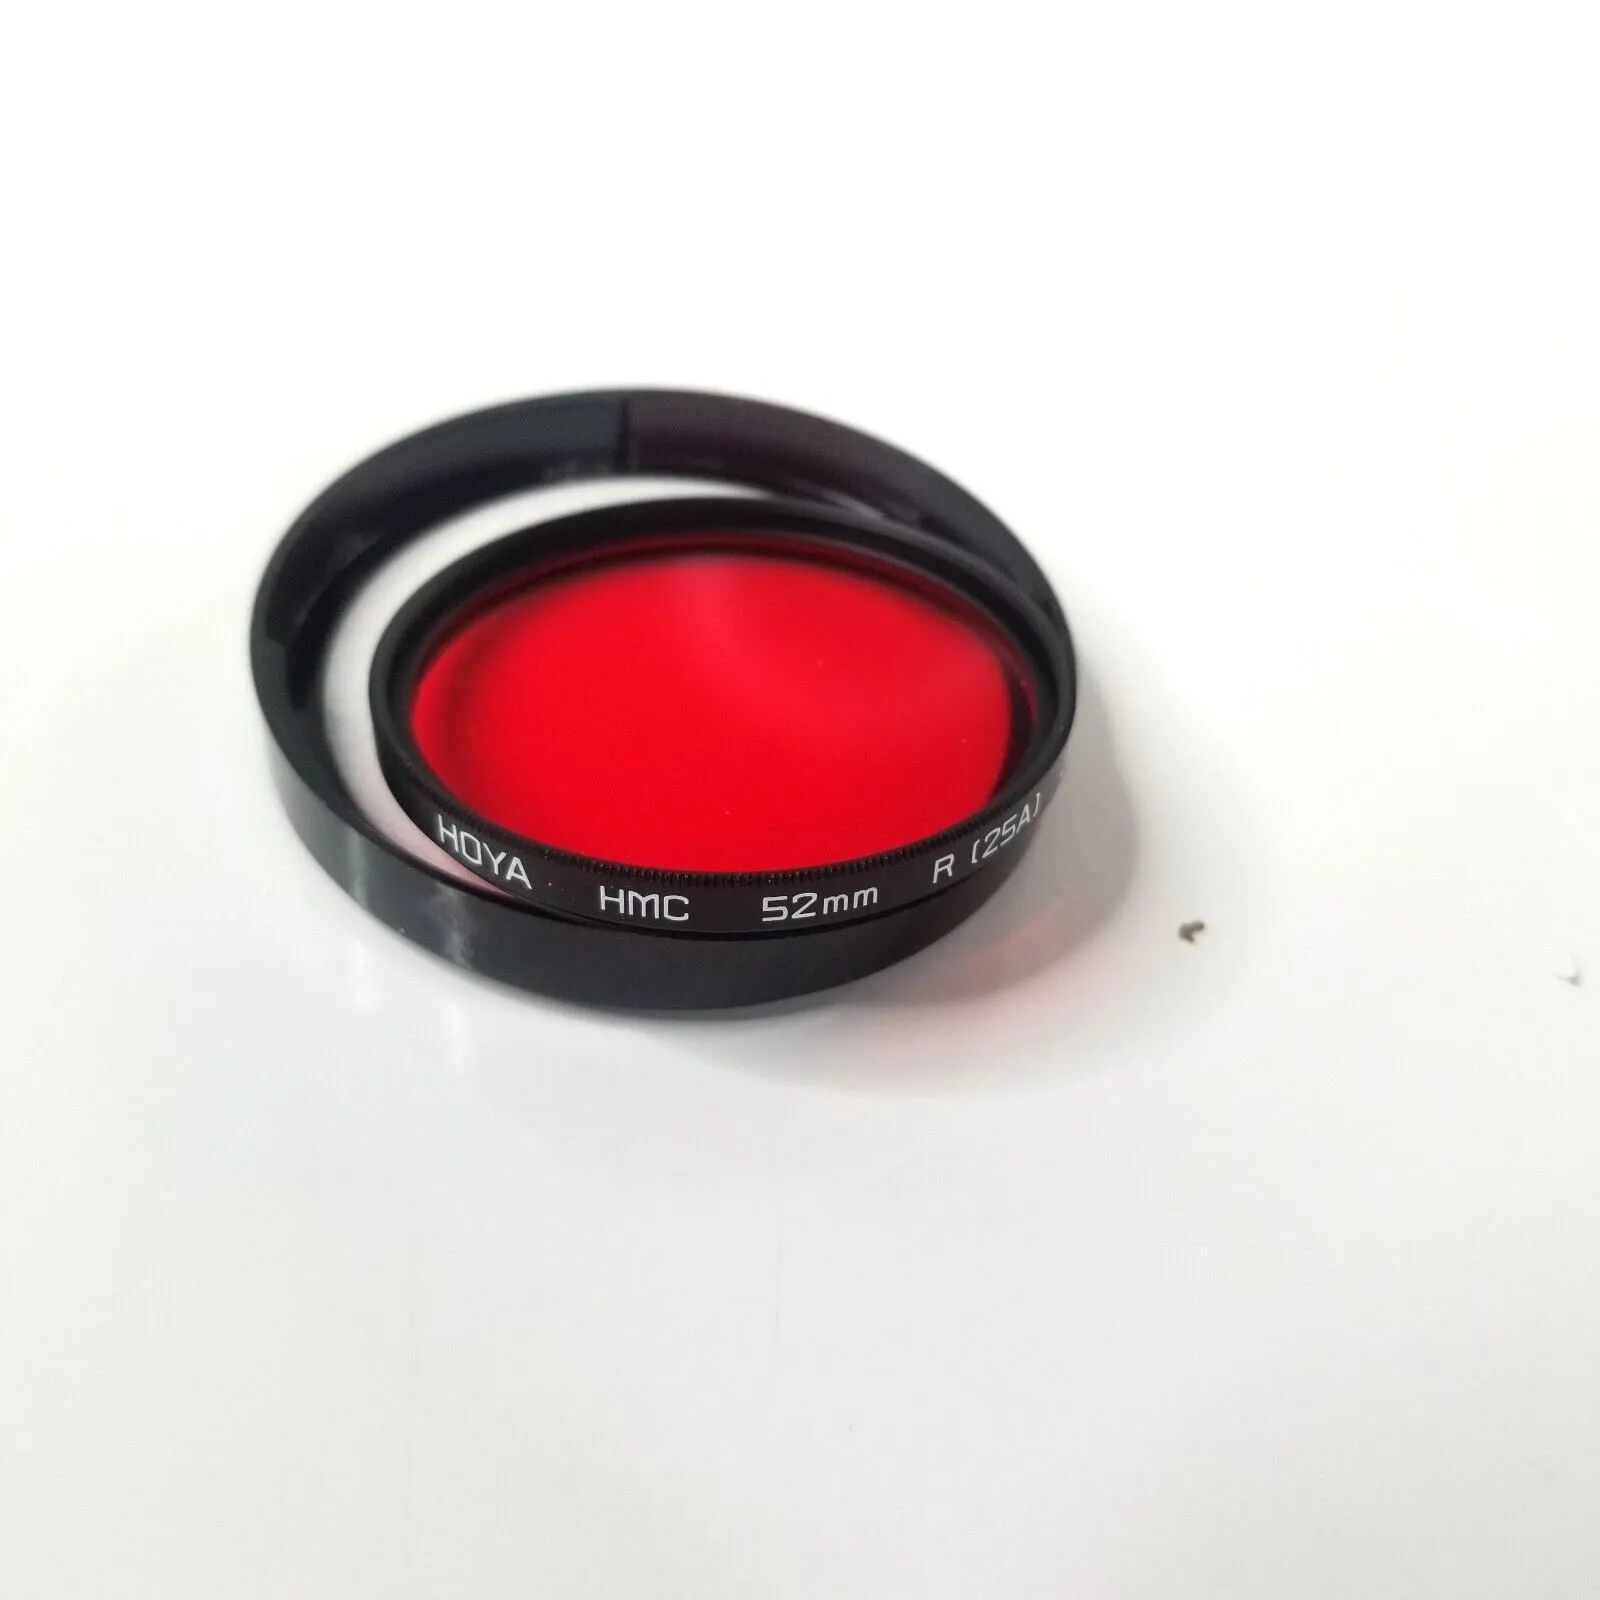 Hoya HMC 52mm R (25A) Red Filter with Case - Thread Mount - Clean